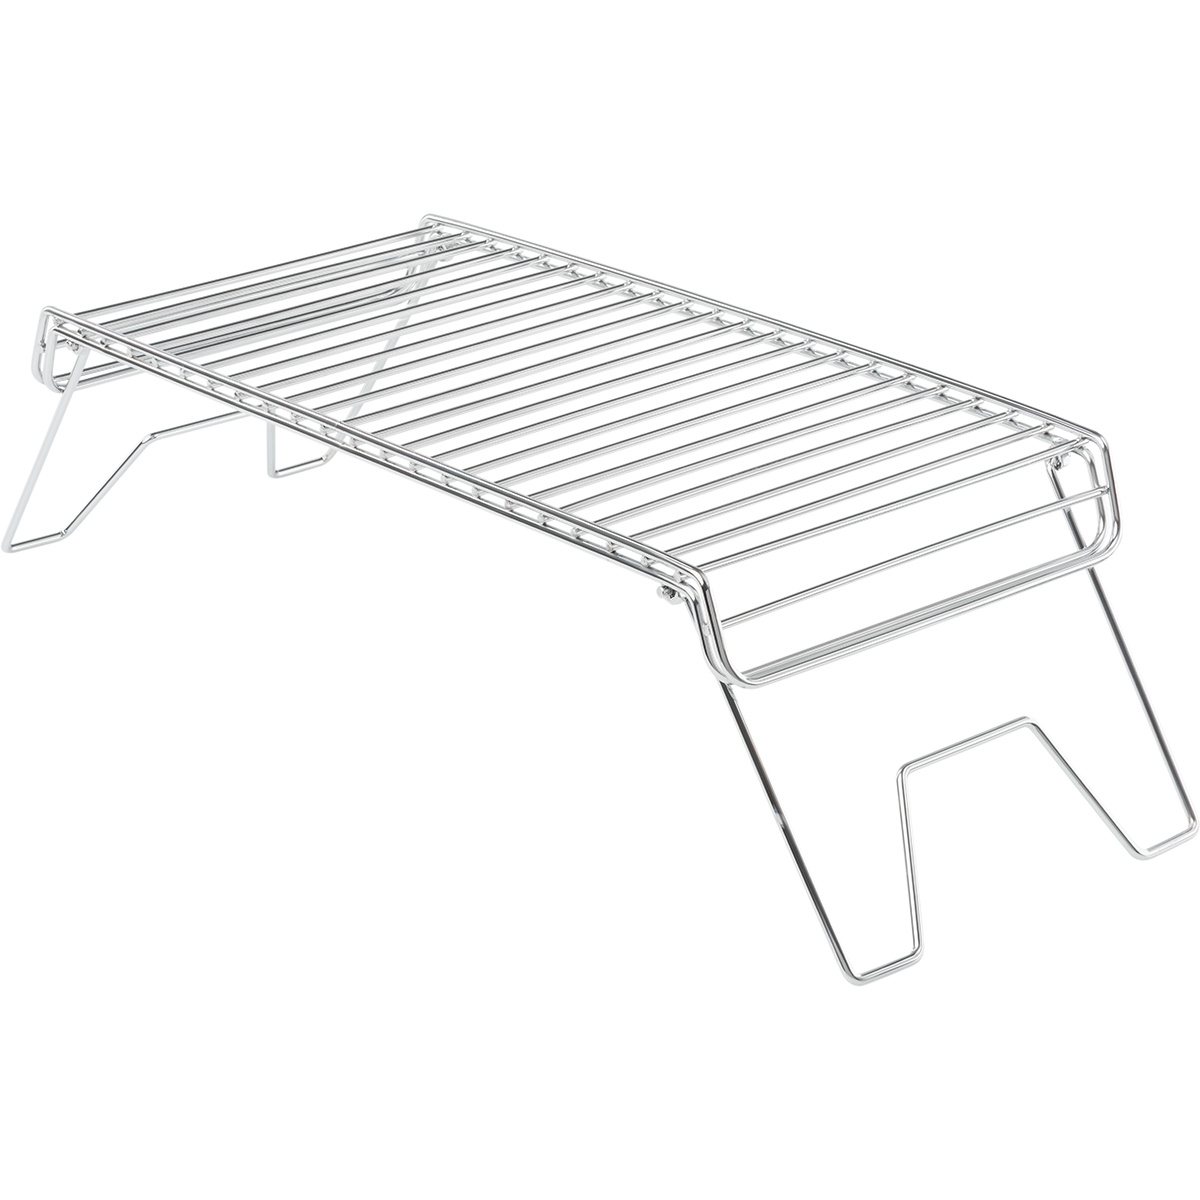 Image of GSI Grill Folding Campfire